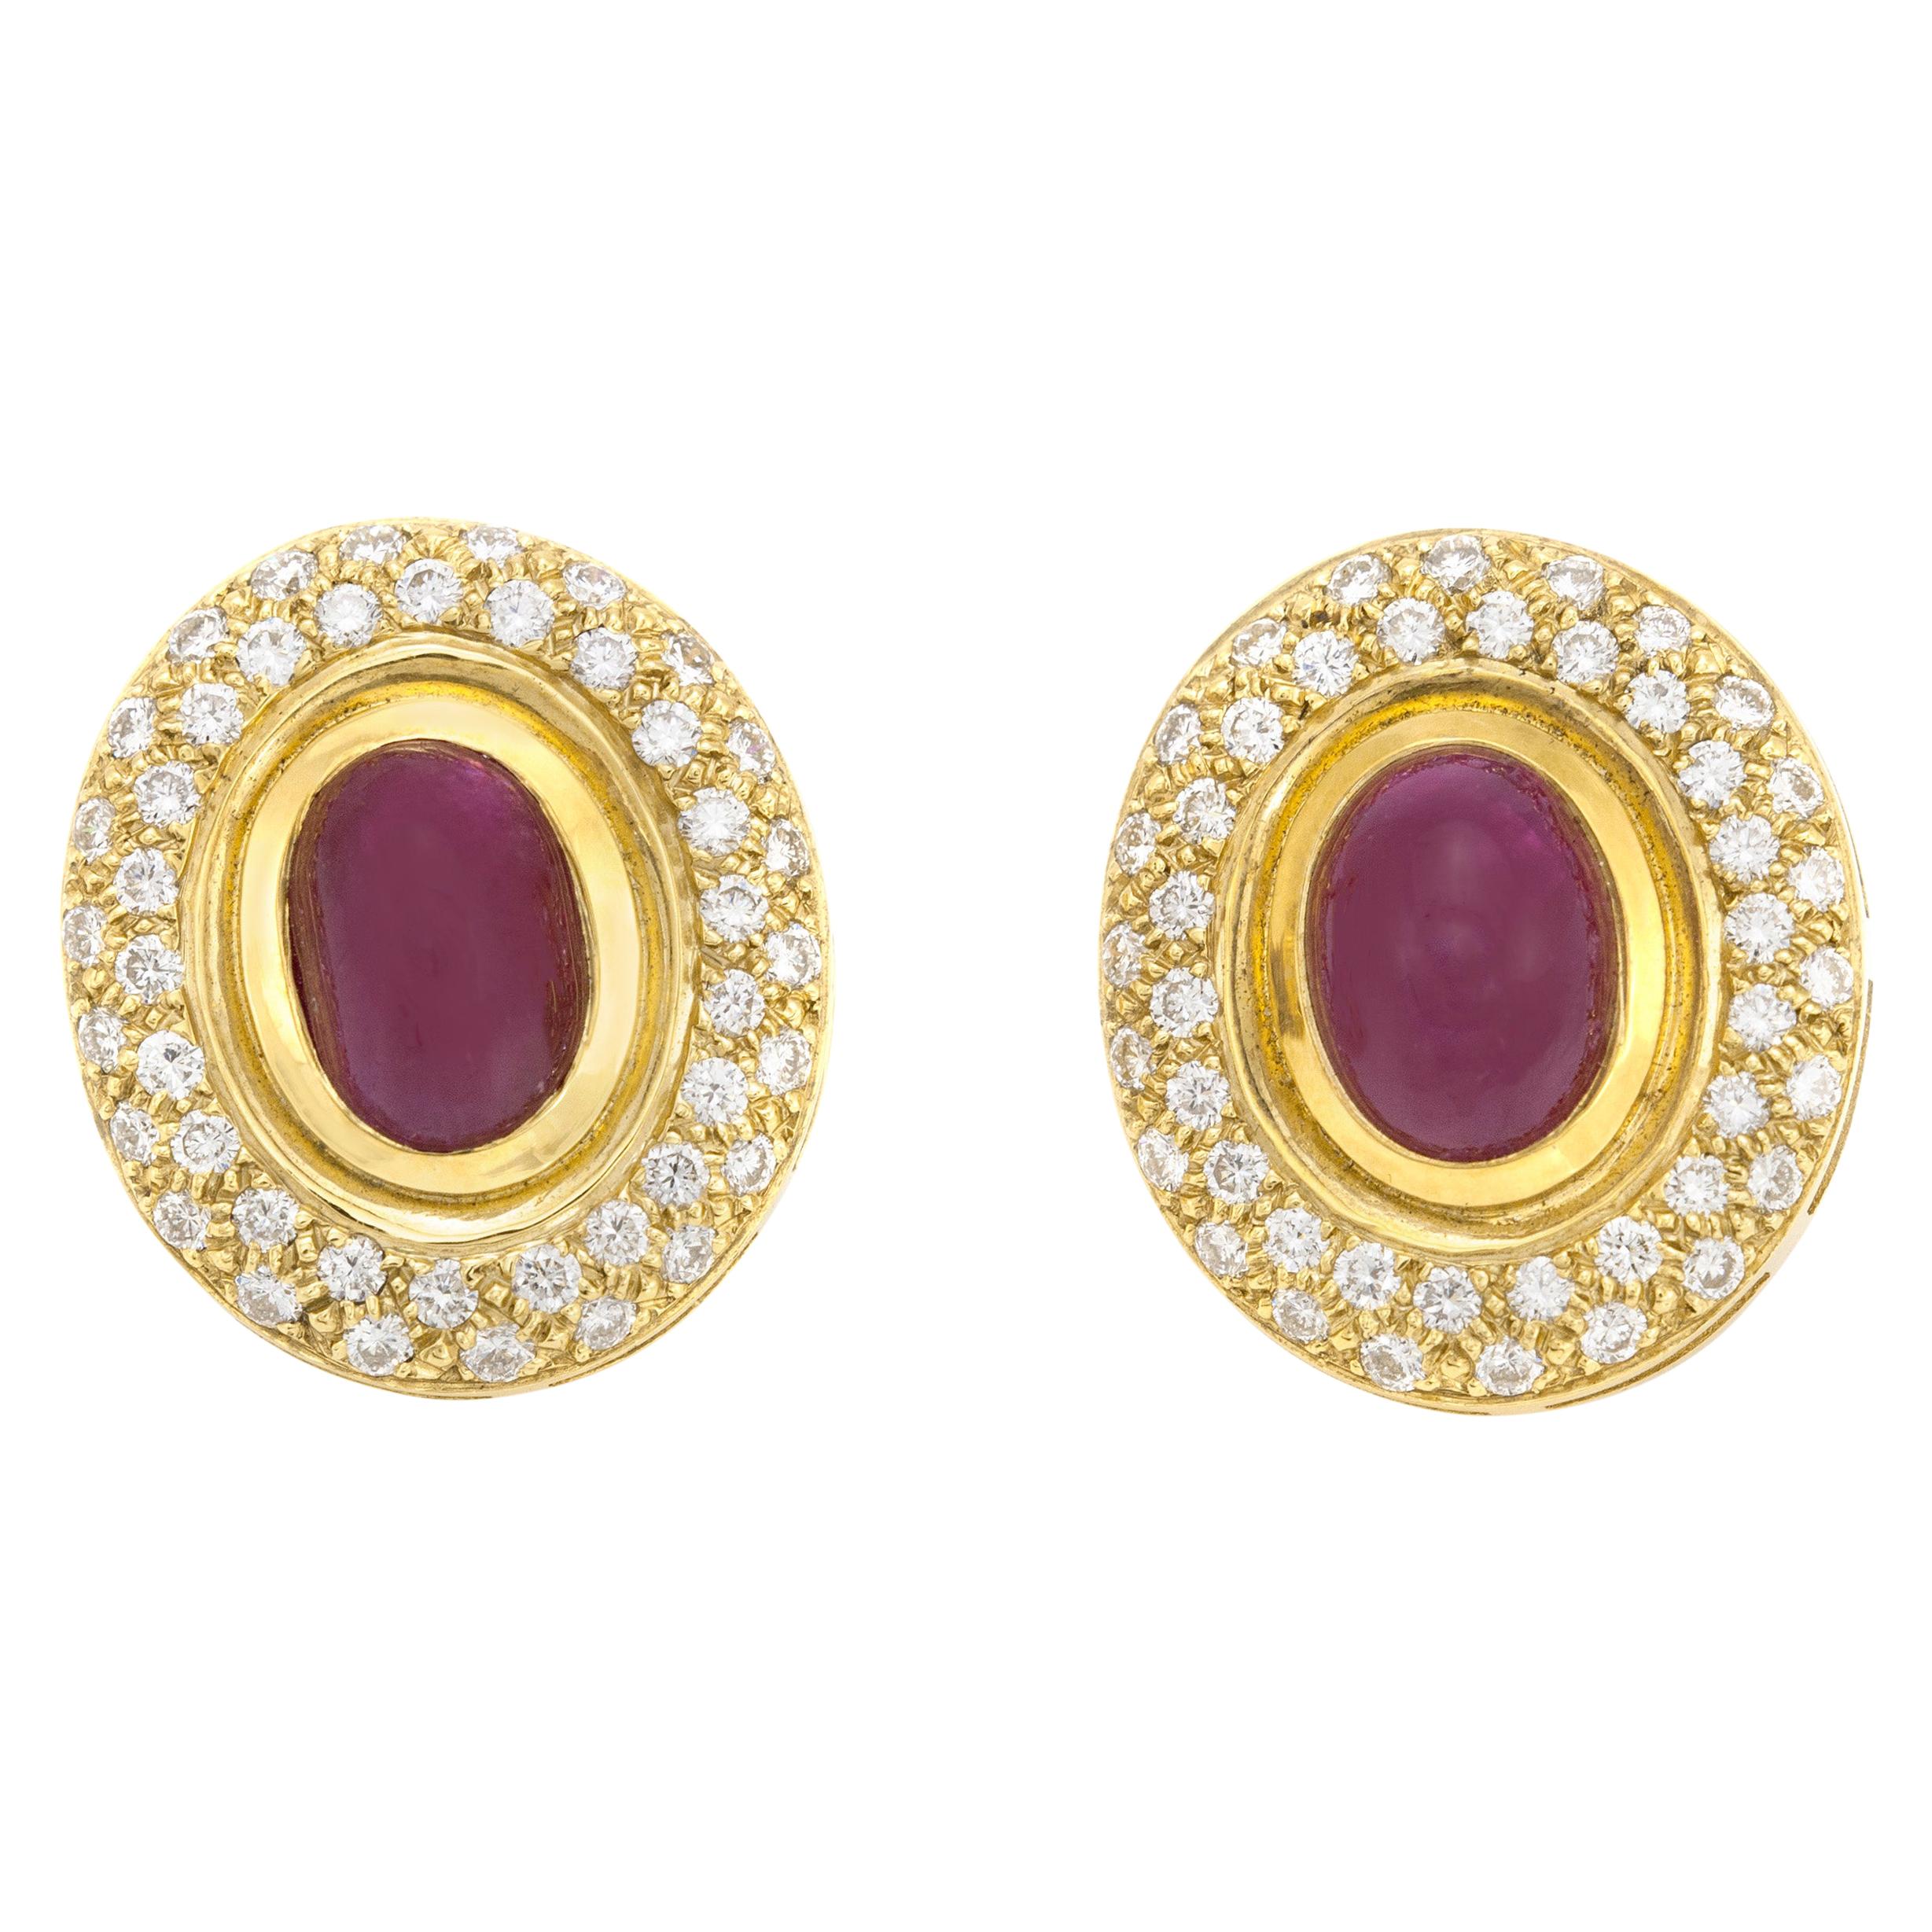 Cabochon Ruby with Diamonds Earrings